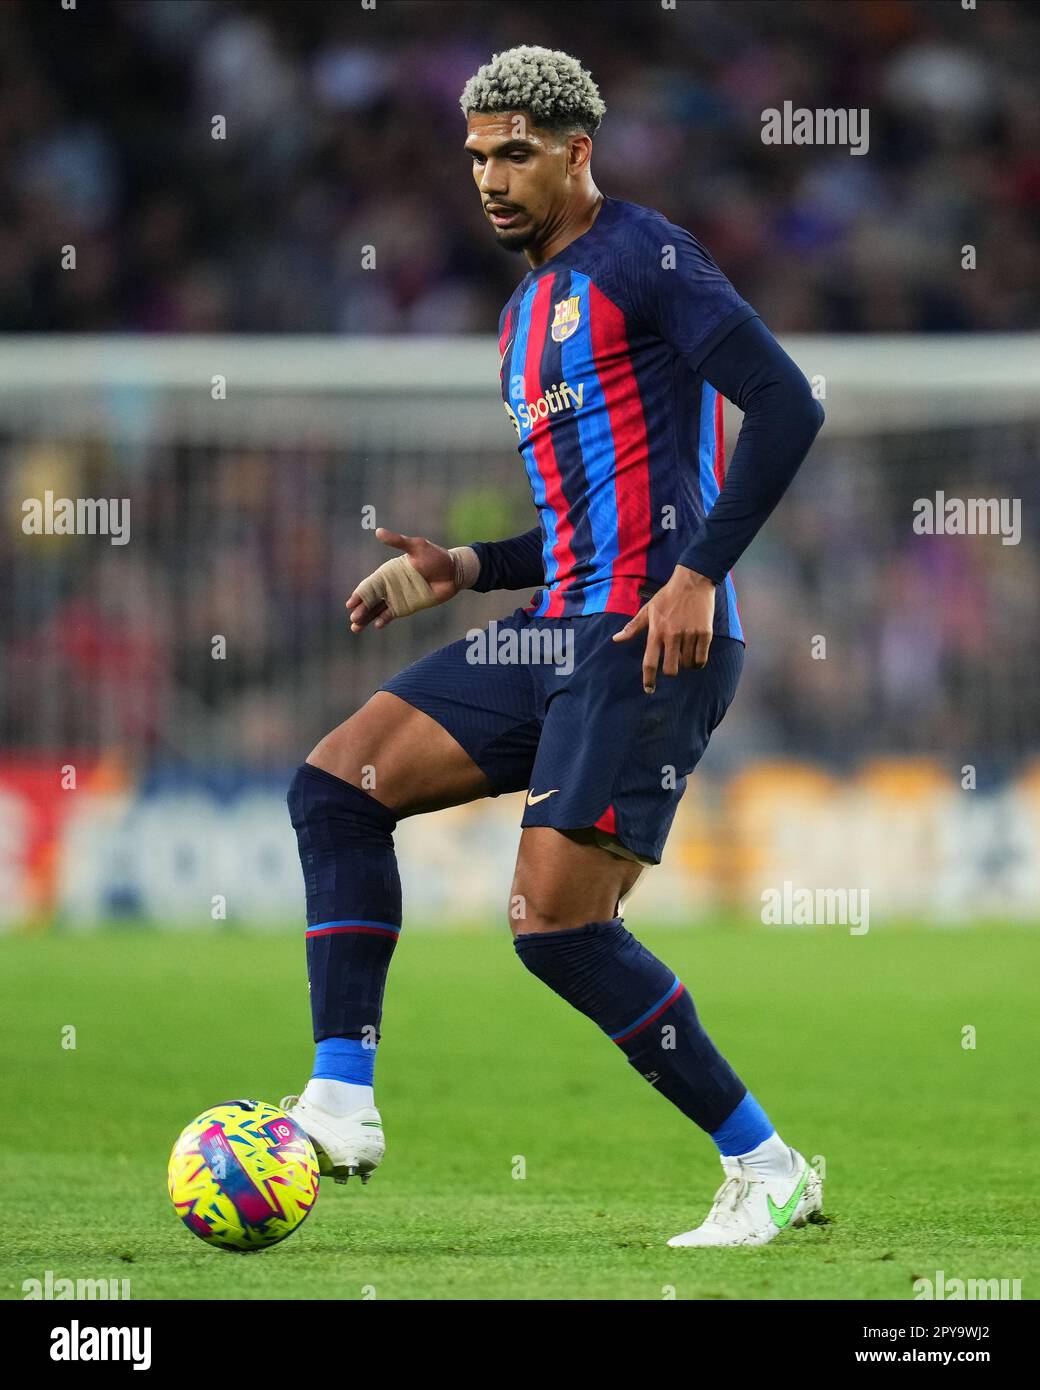 Ronald Araujo of FC Barcelona during the La Liga match between FC Barcelona and CA Osasuna played at Spotify Camp Nou Stadium on May 2, 2023 in Barcelona, Spain